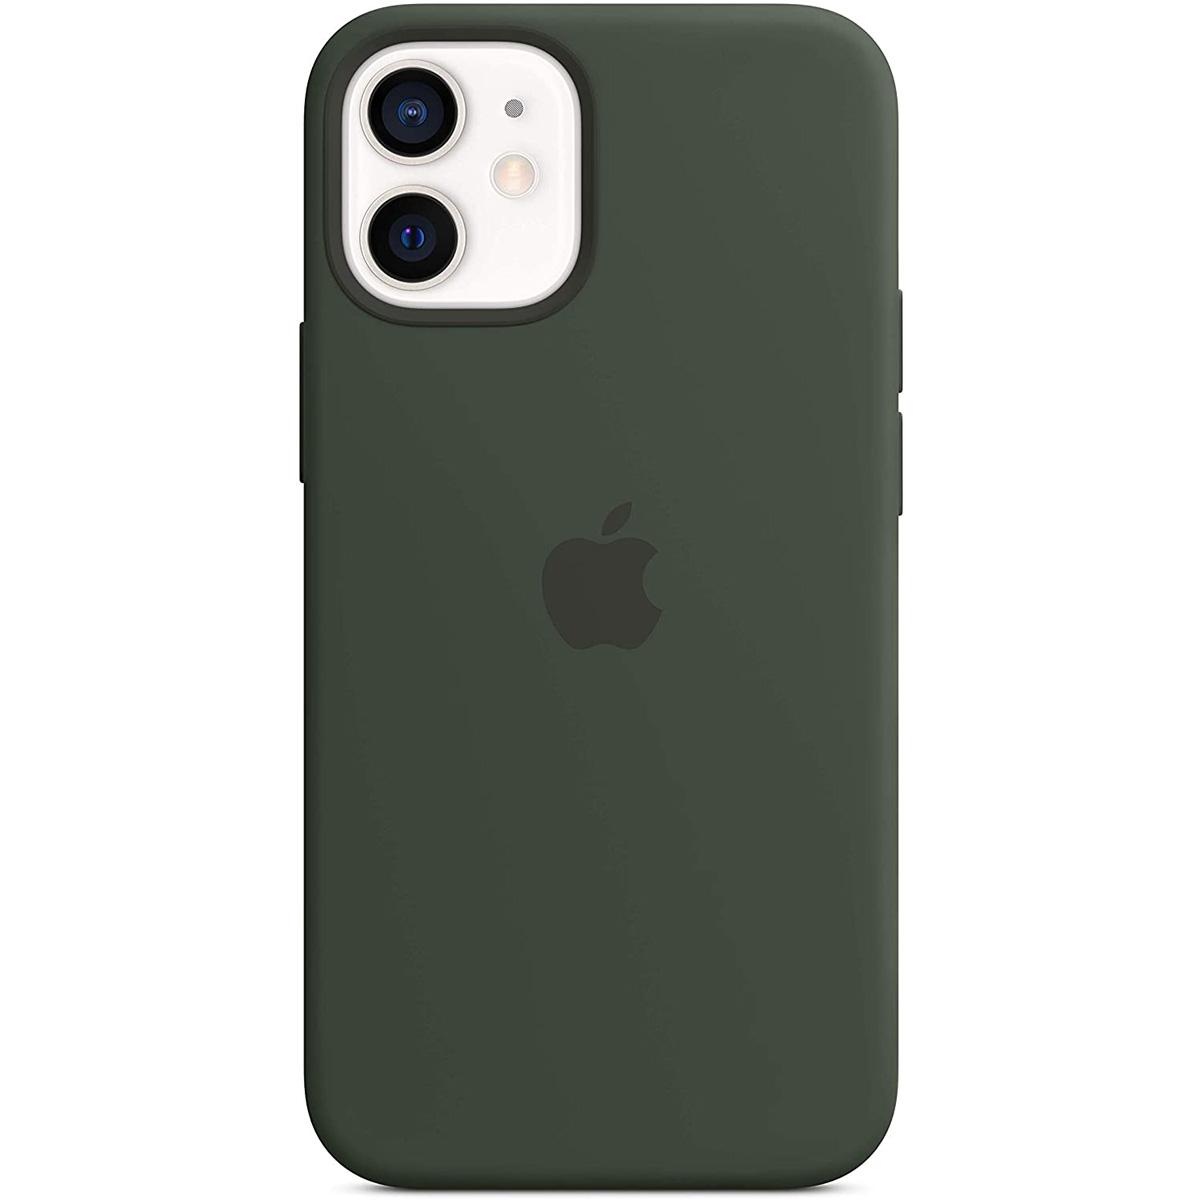 Apple iPhone 12 mini Green Silicone Case with MagSafe for $26 Shipped